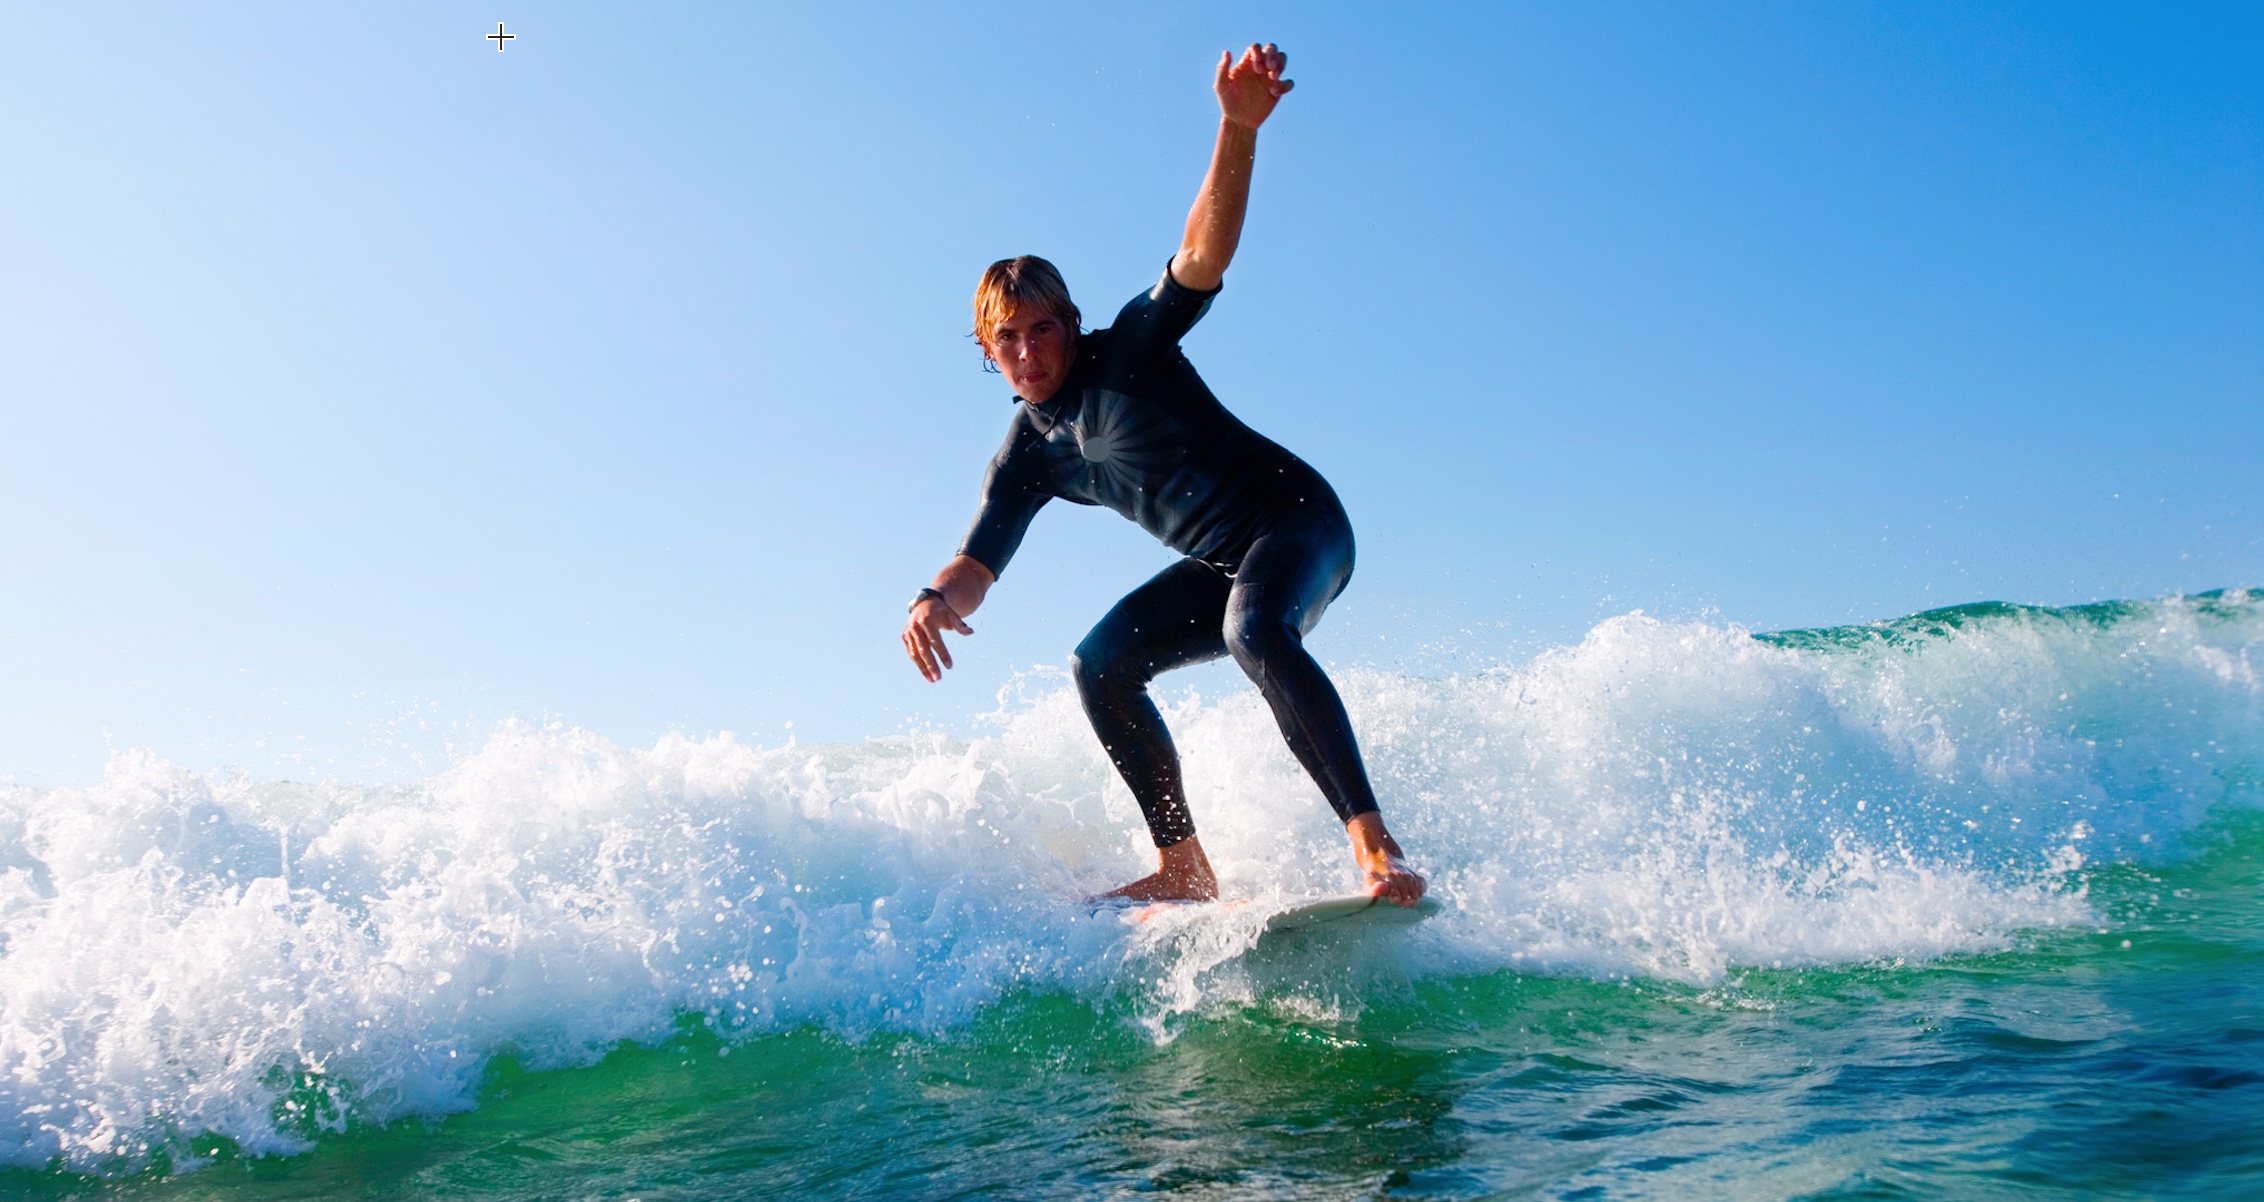 A man in a wetsuit gracefully rides a wave on a surfboard, embodying the thrill of learning new skills.